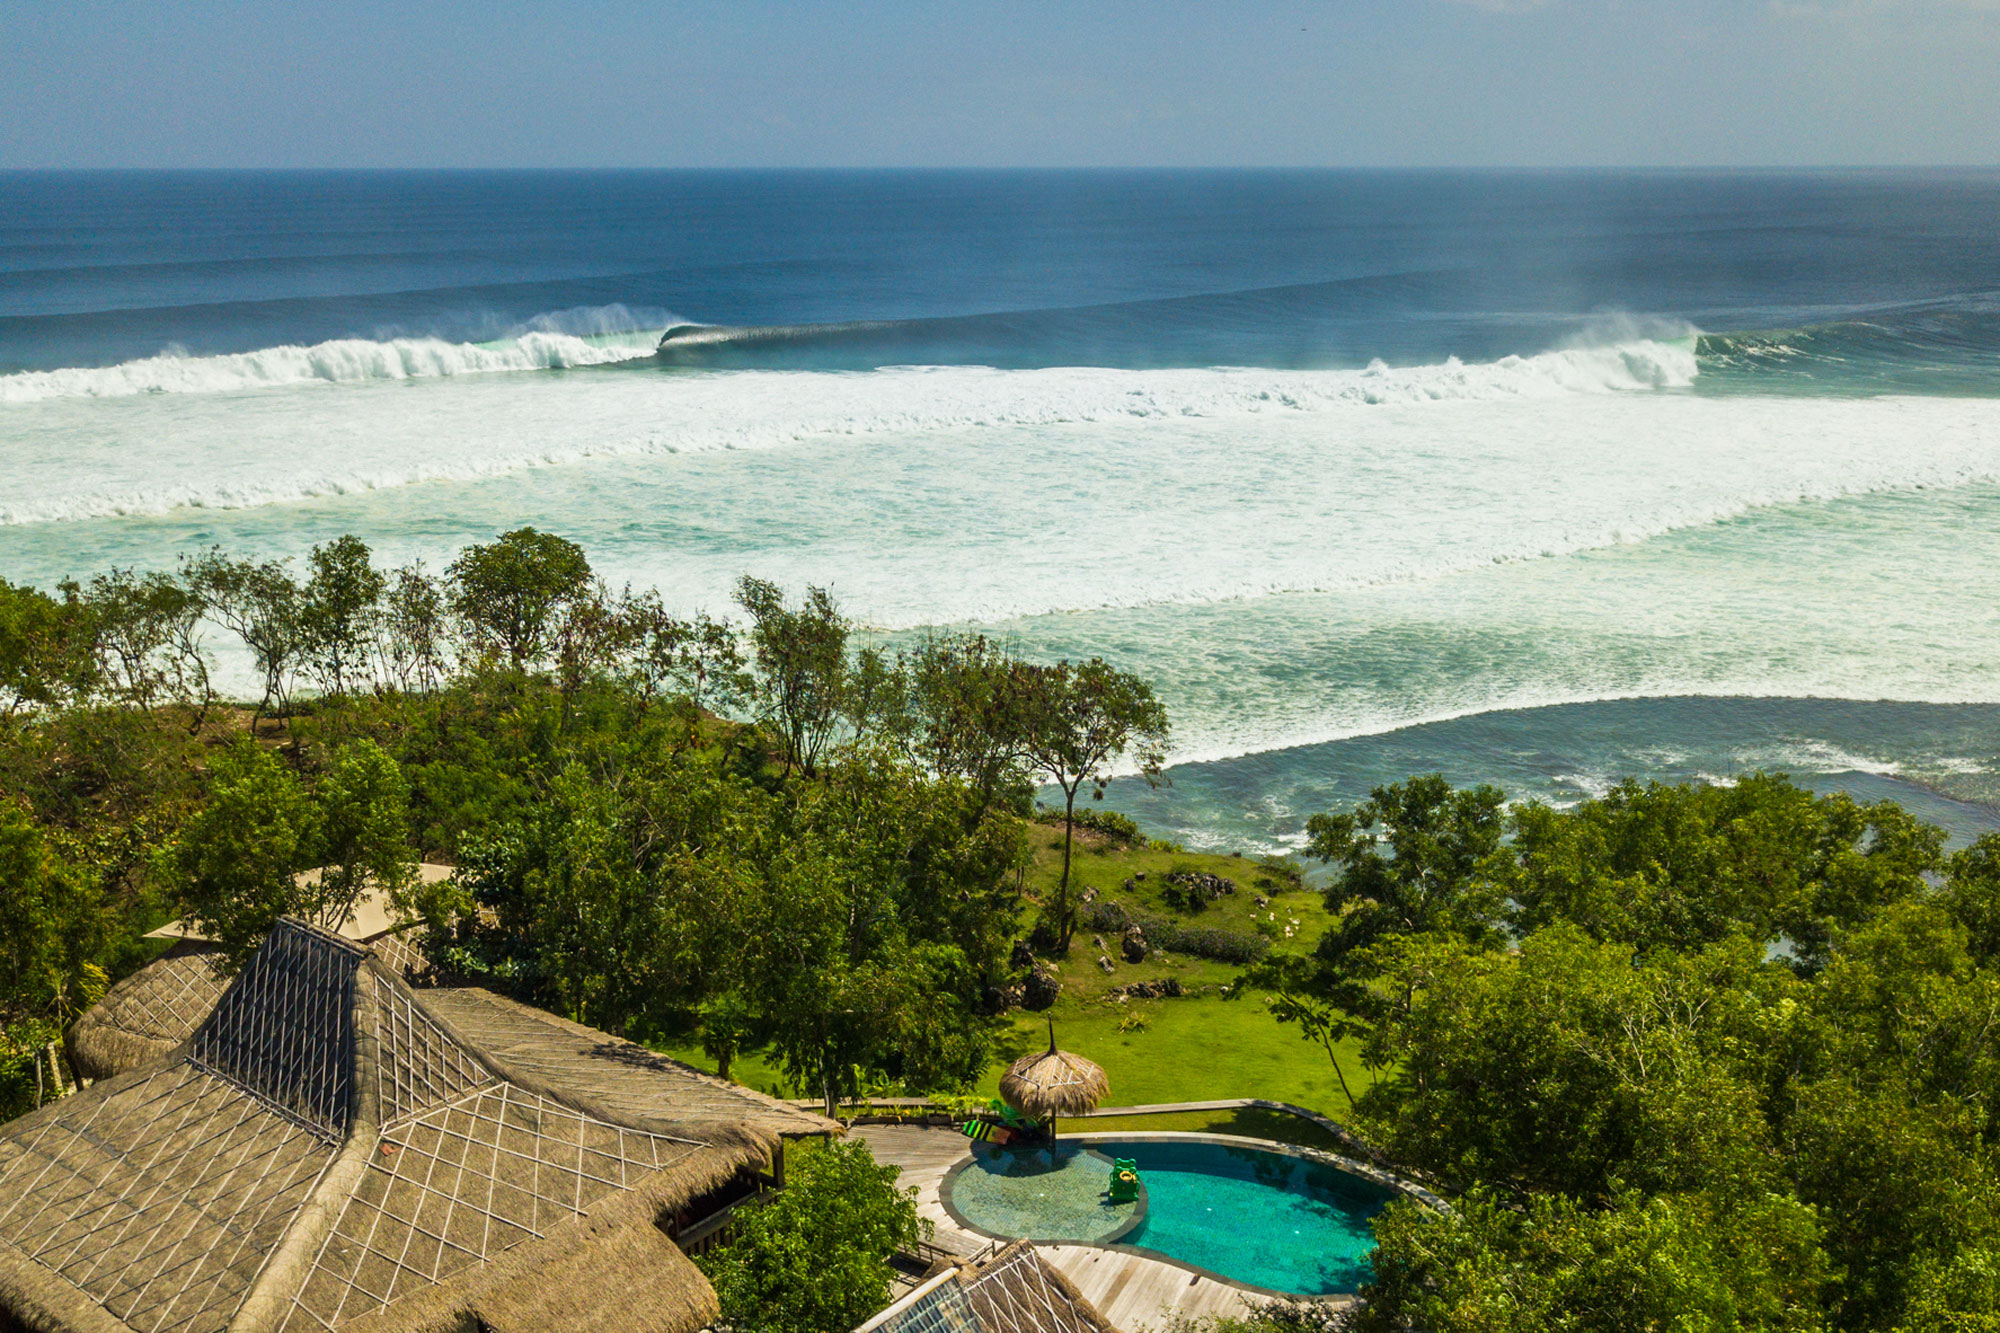 Biggest Indo Swell Ever? Here's the Data.